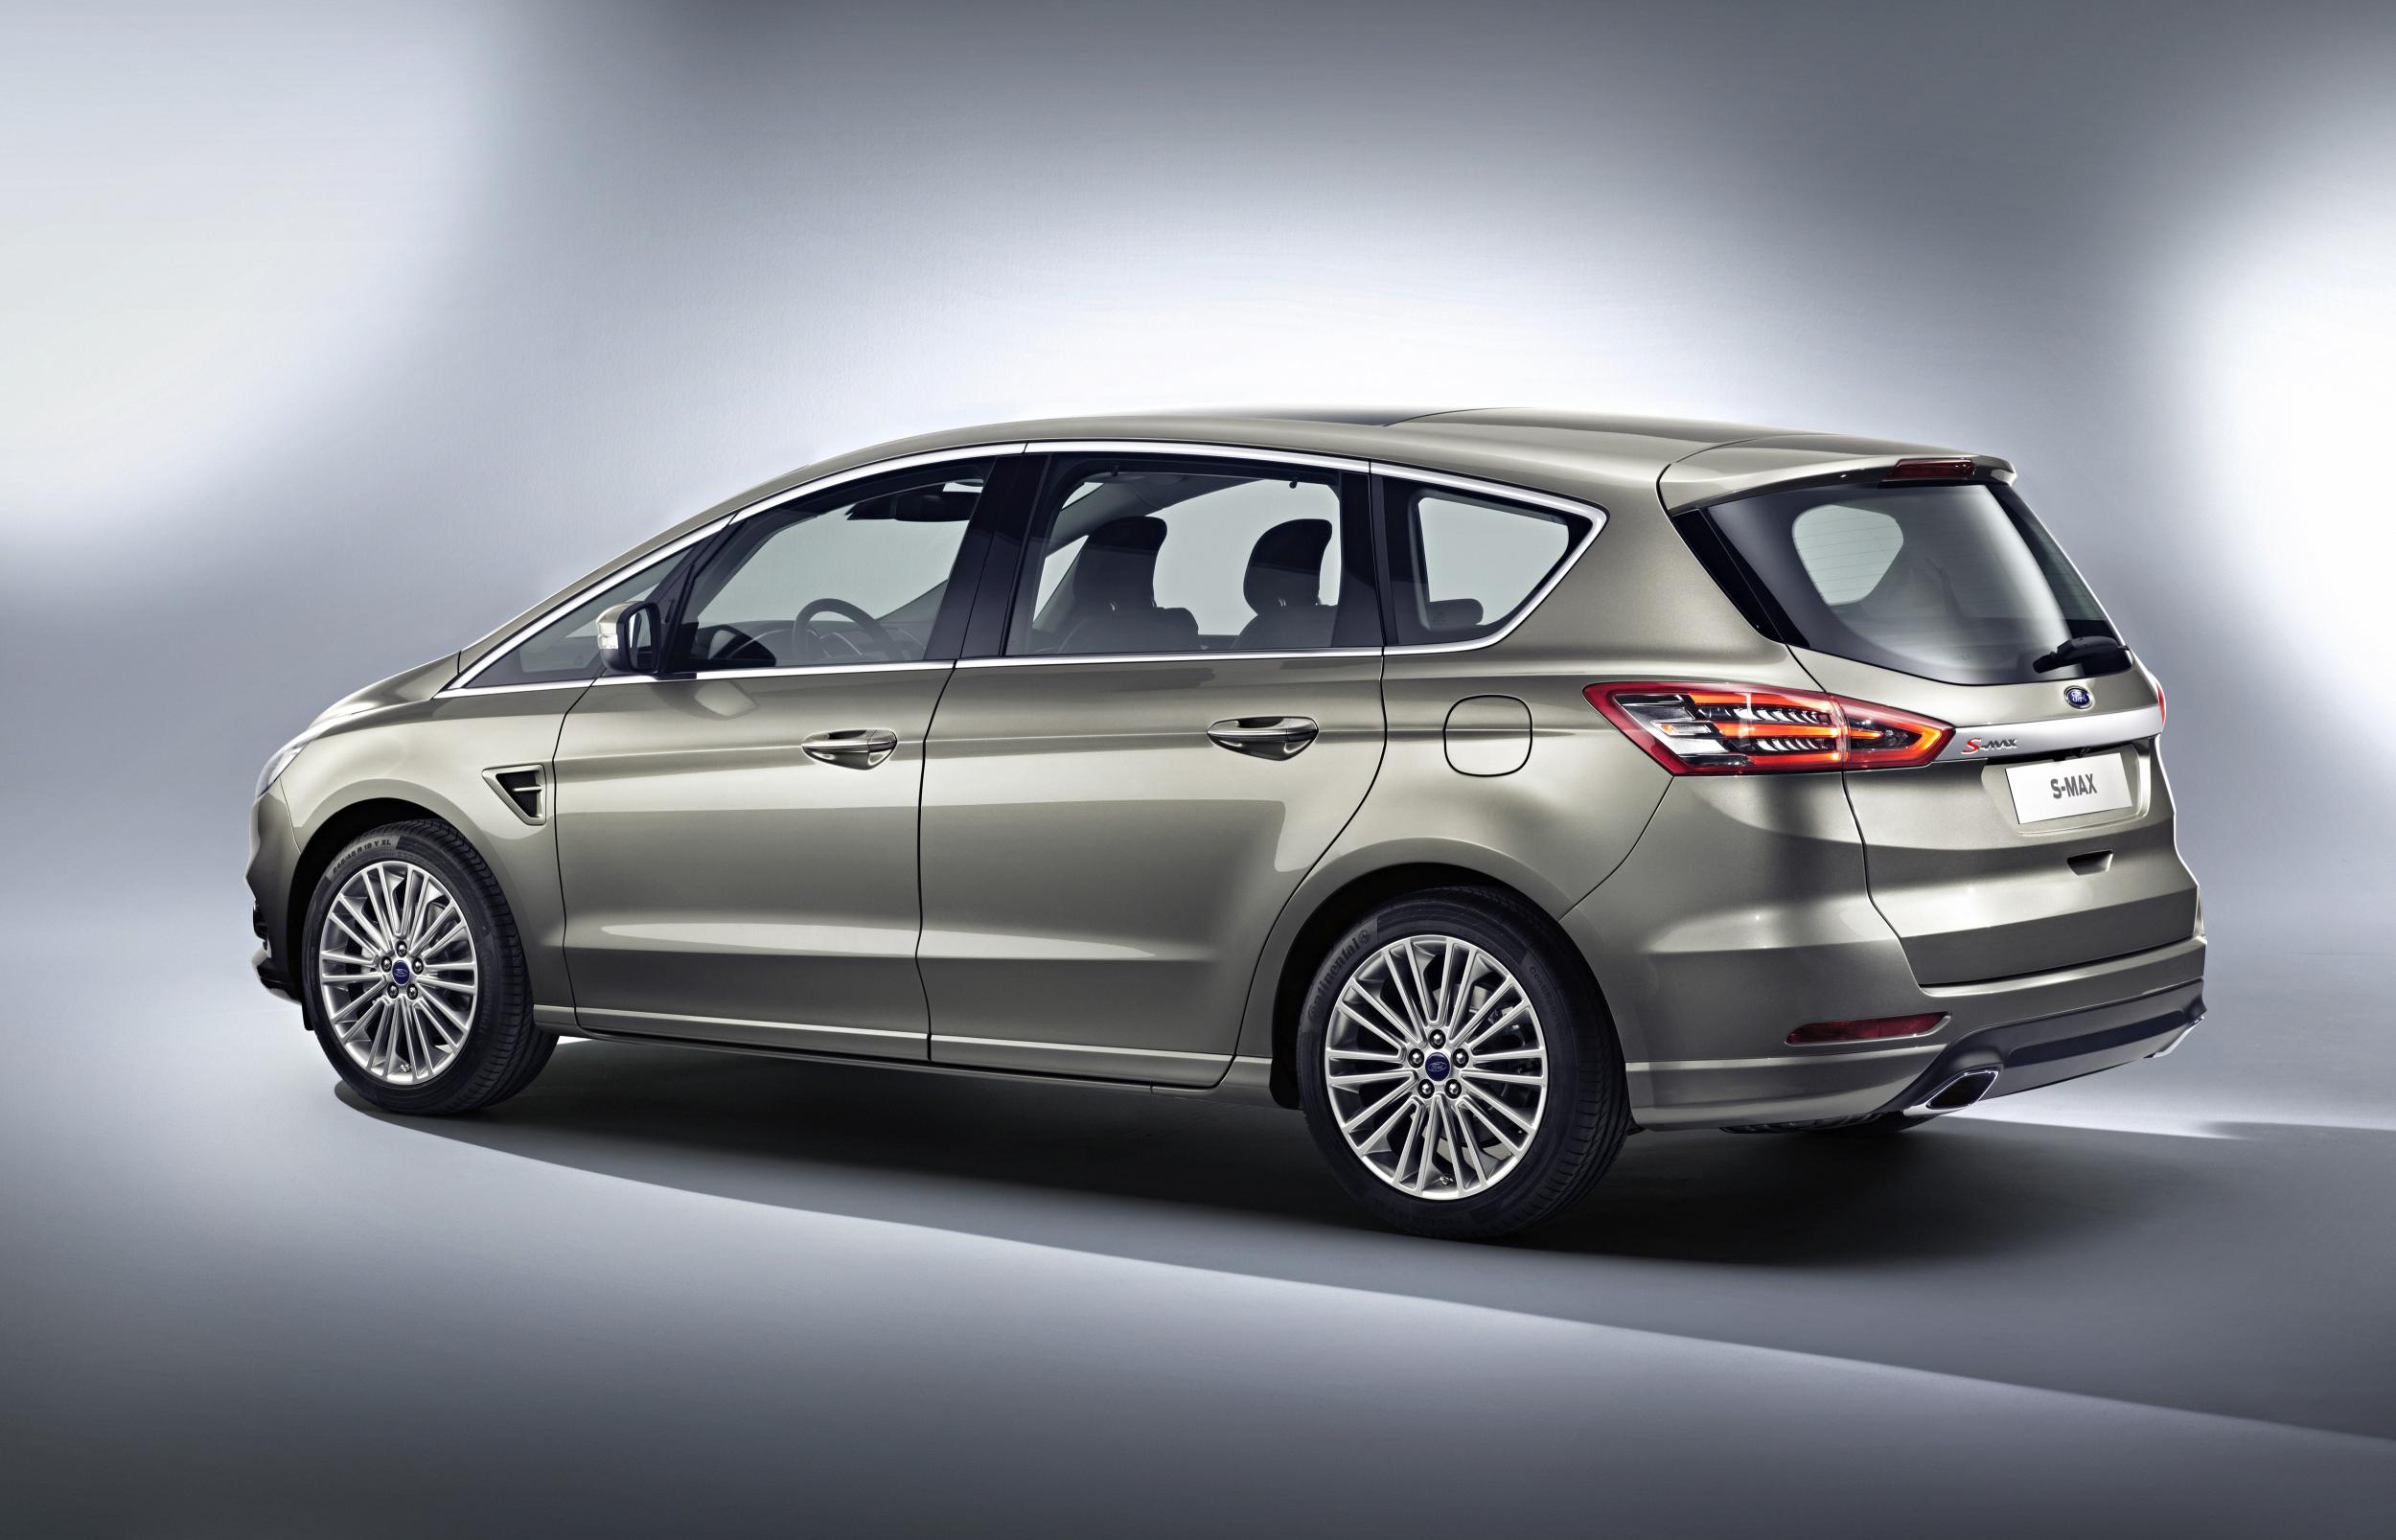 2015 Ford SMax Detailed Ahead of Paris Motor Show Debut